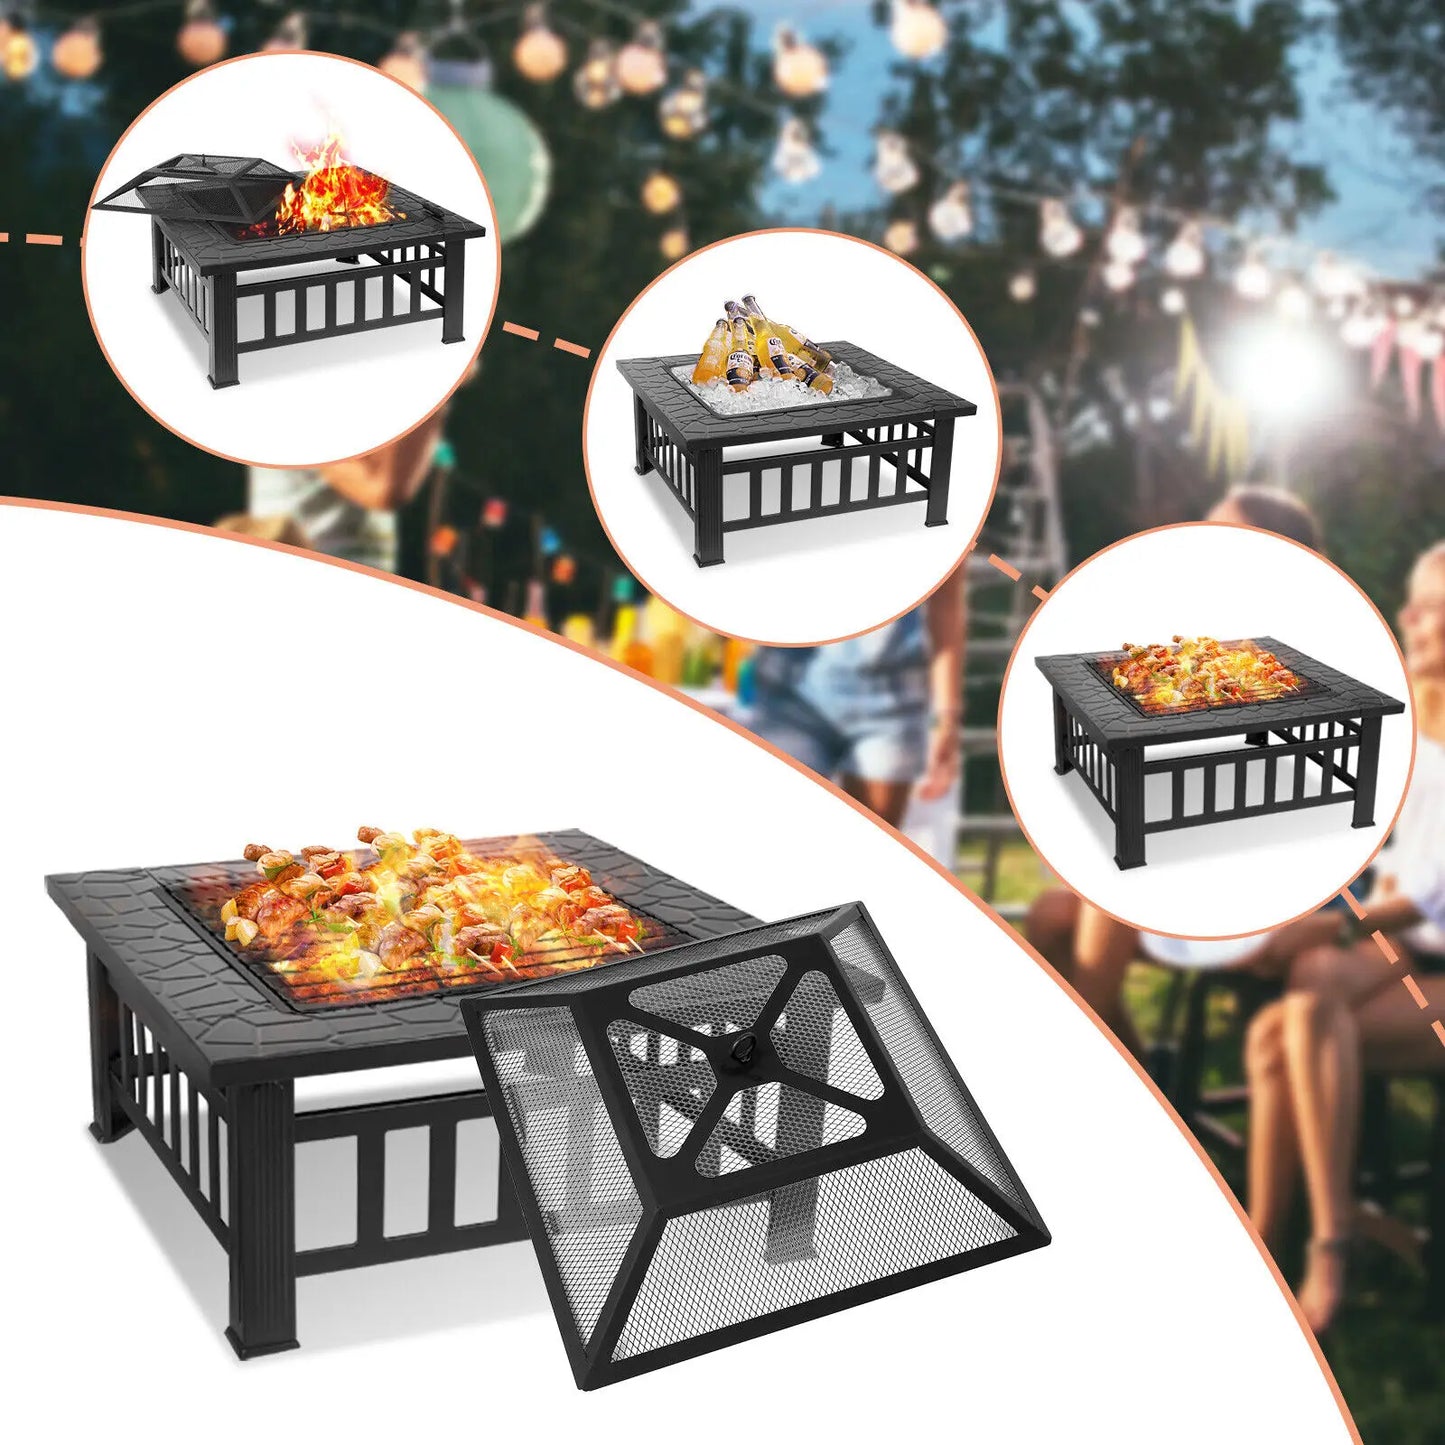 32" Wood Burning Fire Pit Backyard Patio Garden Square Stove Fire Pit W/ Cover